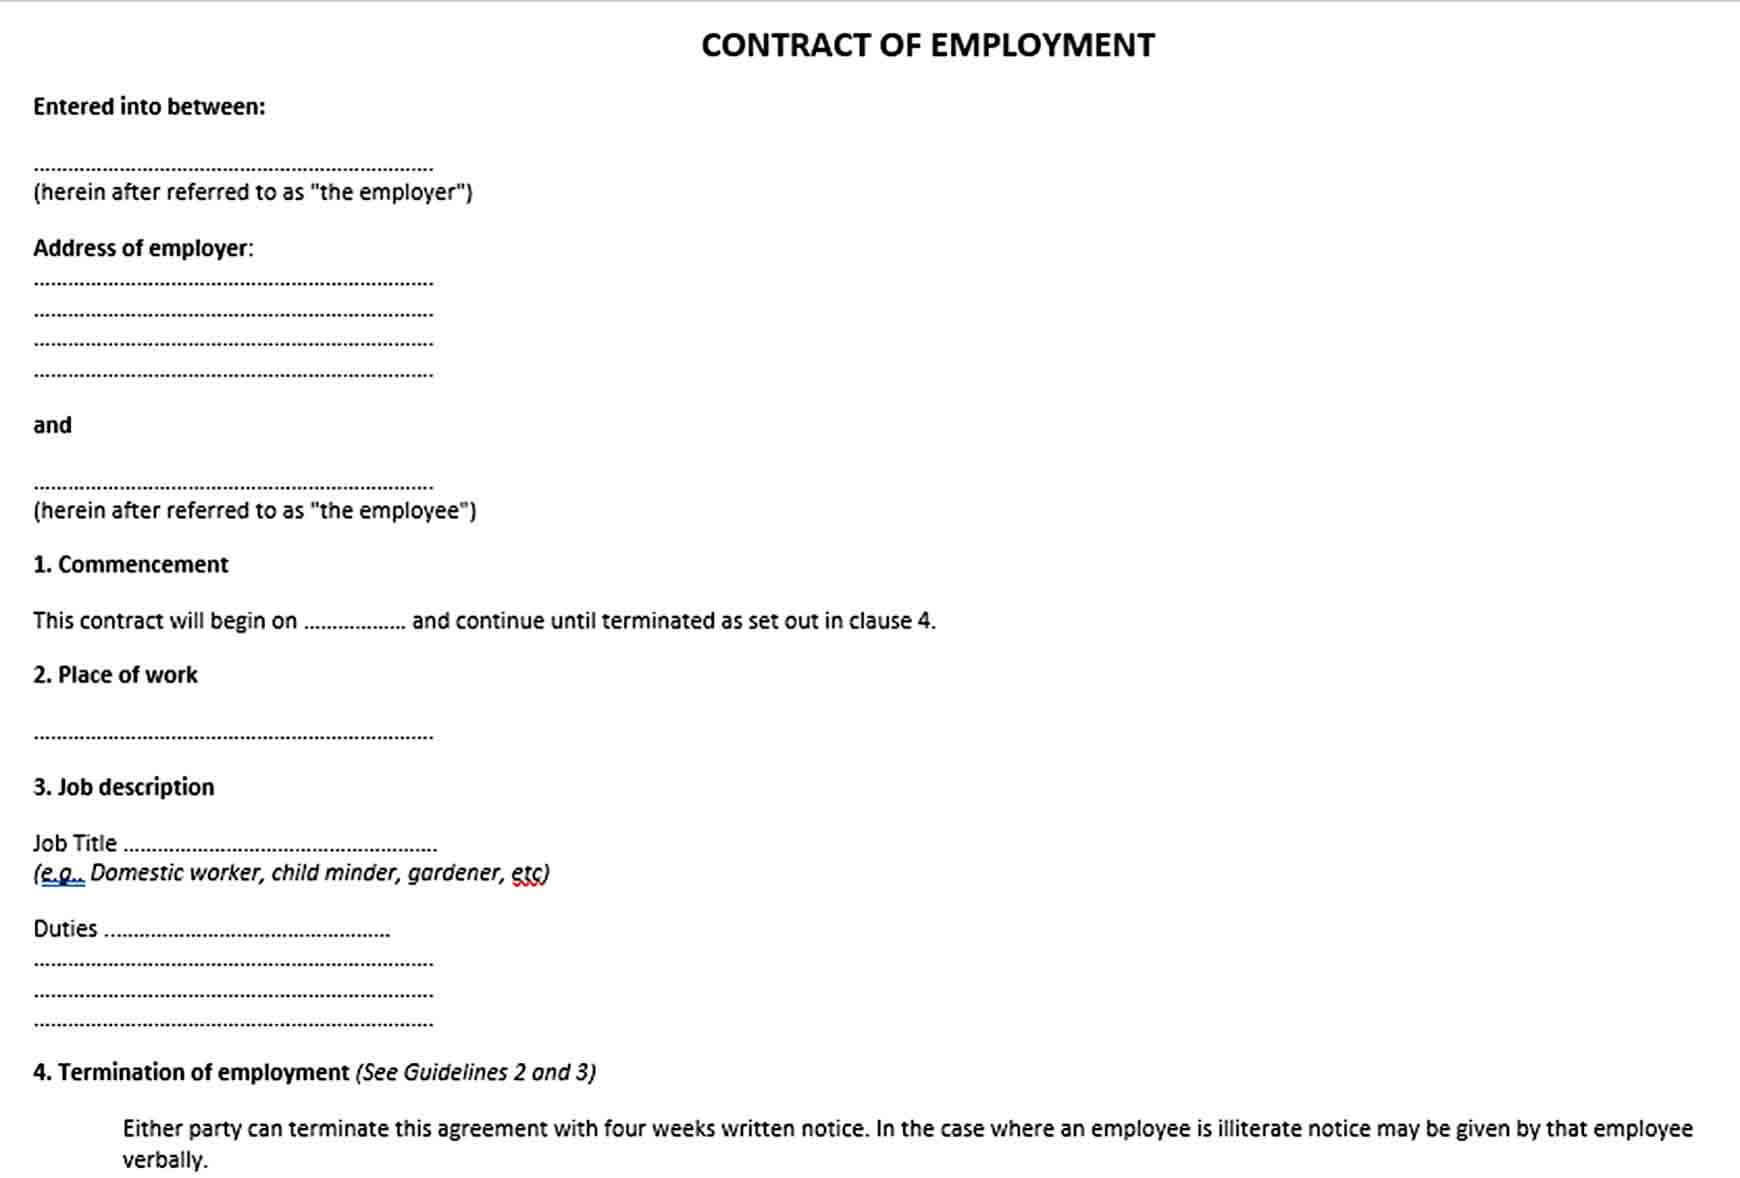 Sample Contract Of Employment Agreement Document